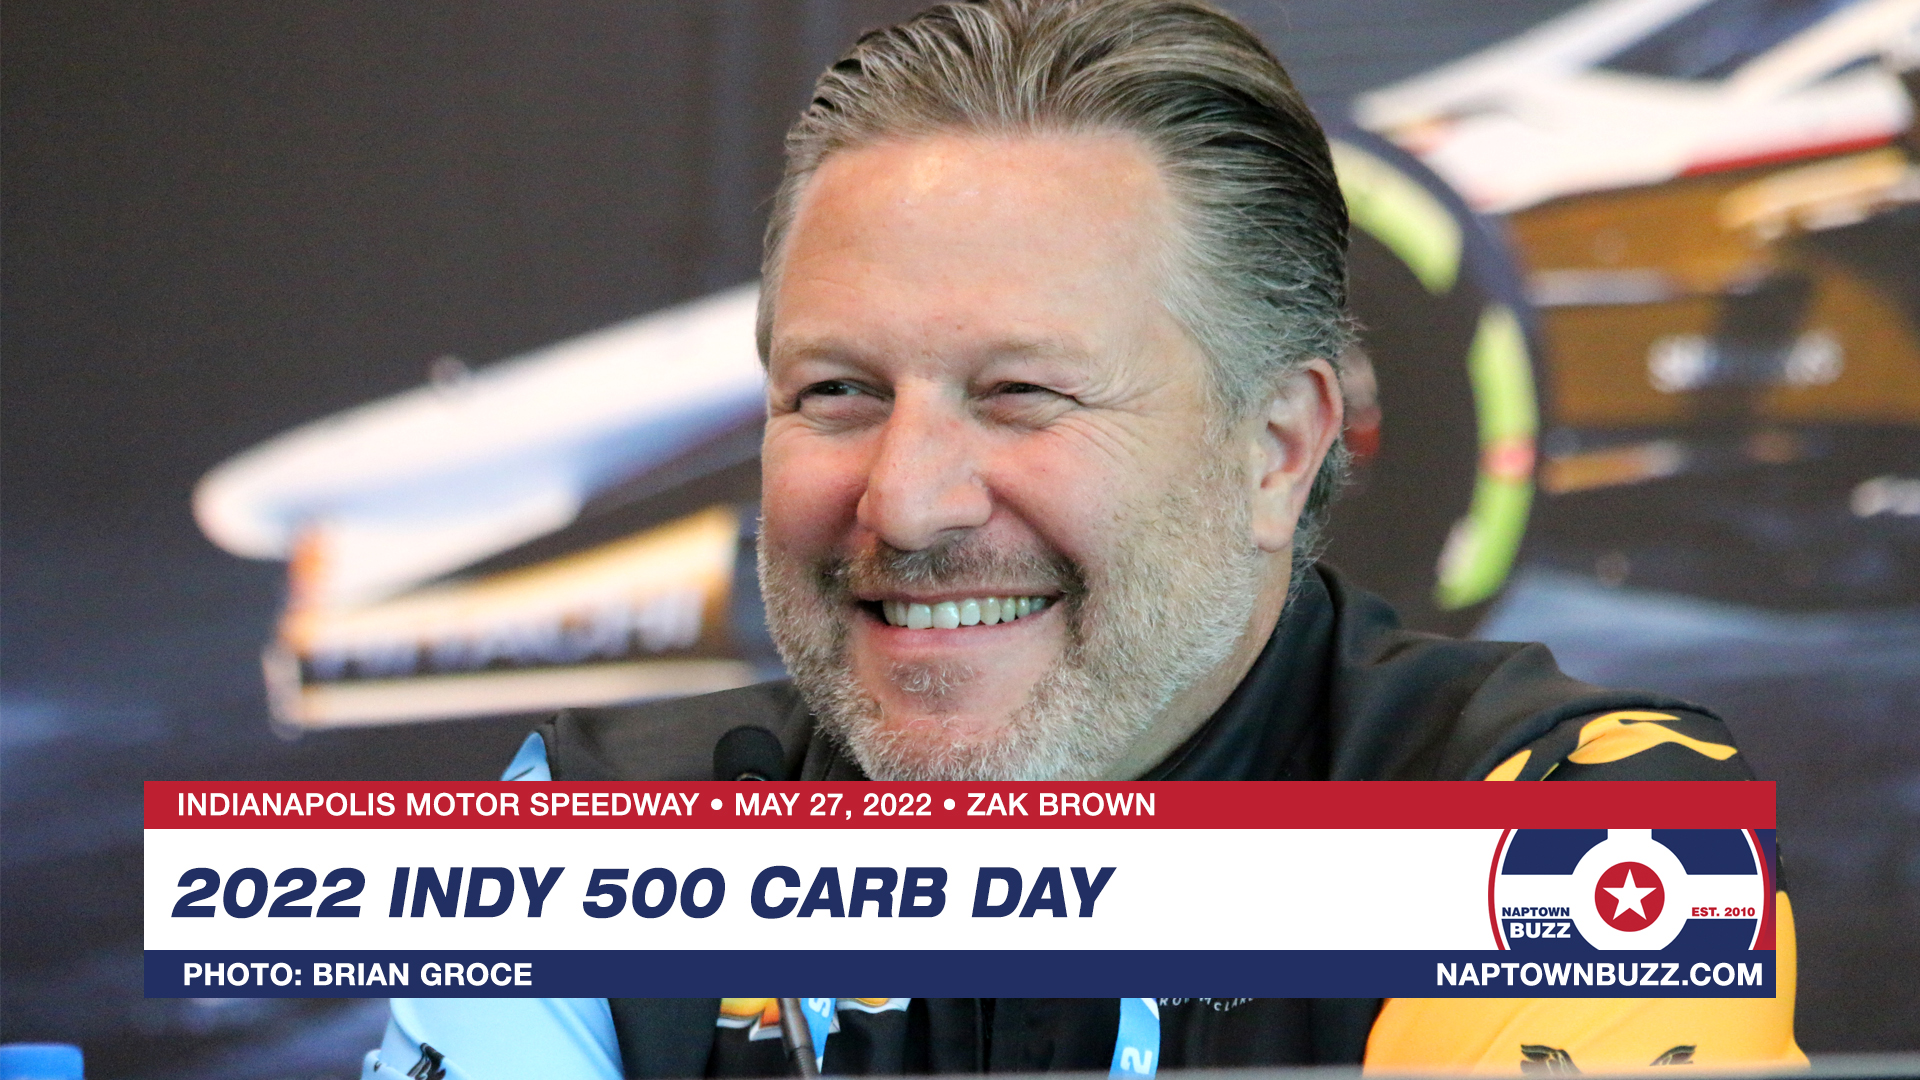 Indy 500 Carb Day May 27, 2022 Zak Brown